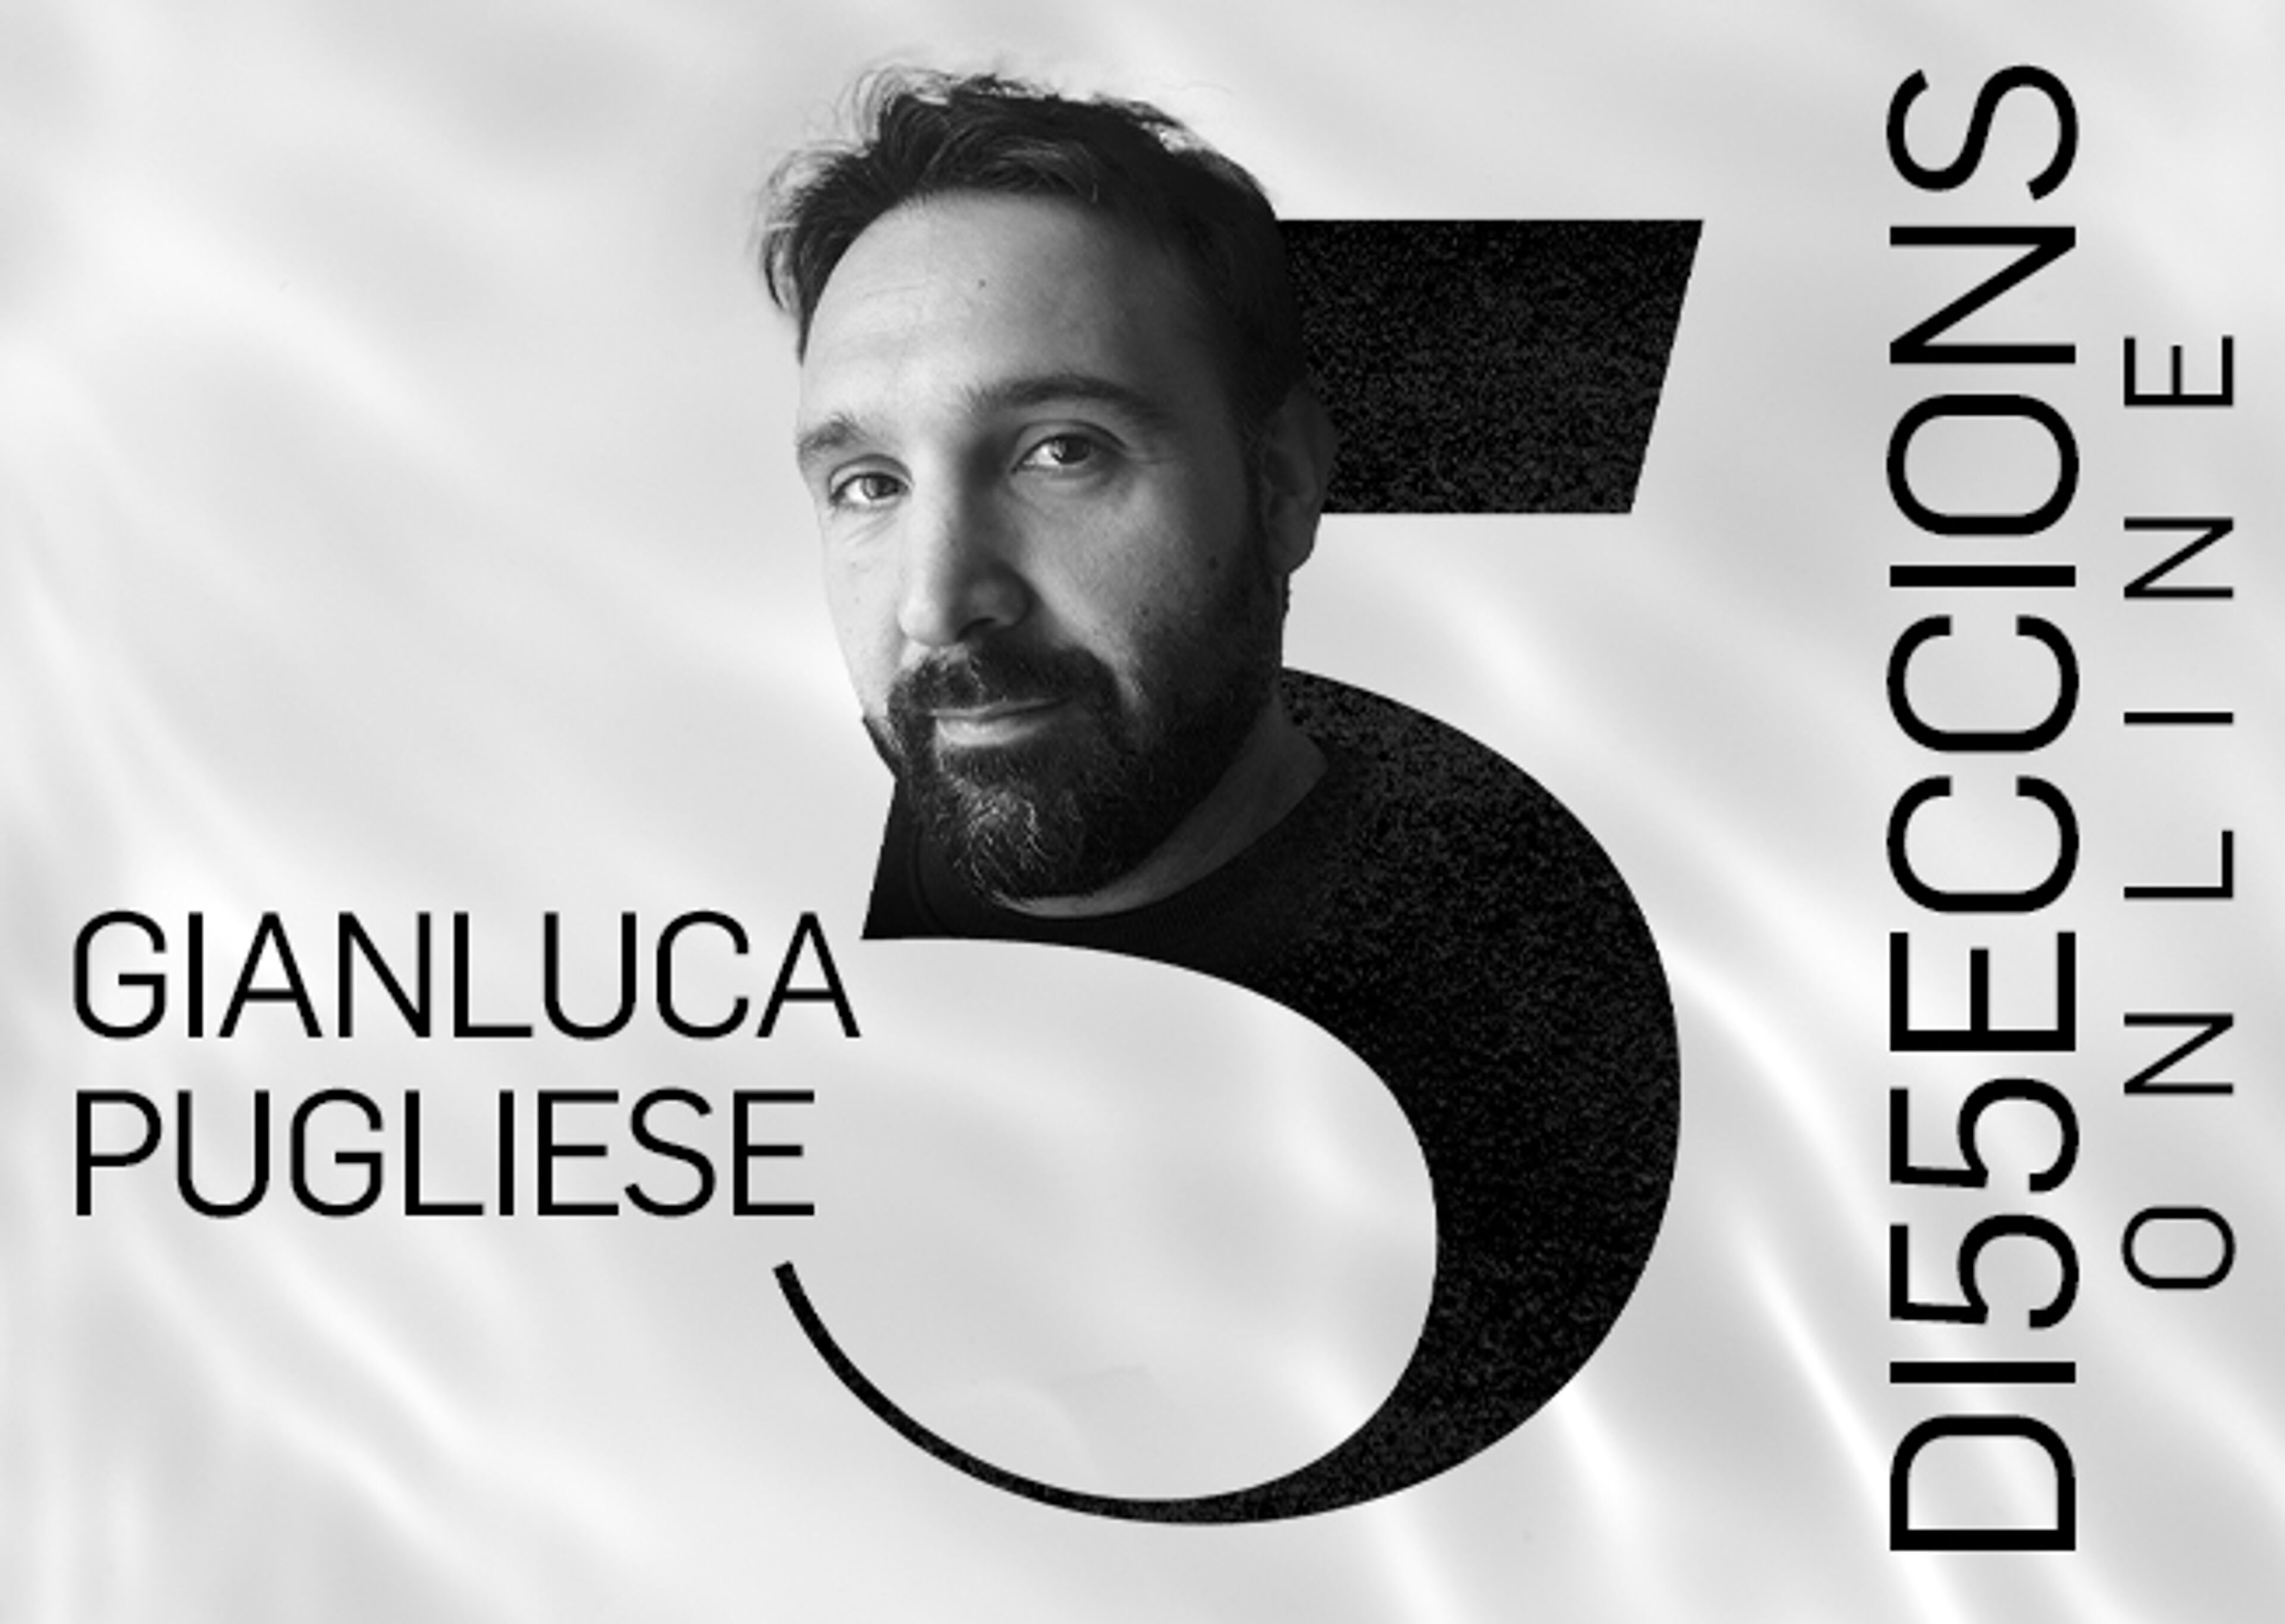 A stylized black and white image of a man with graphic text and a large numeral design, indicative of personal branding or promotion.